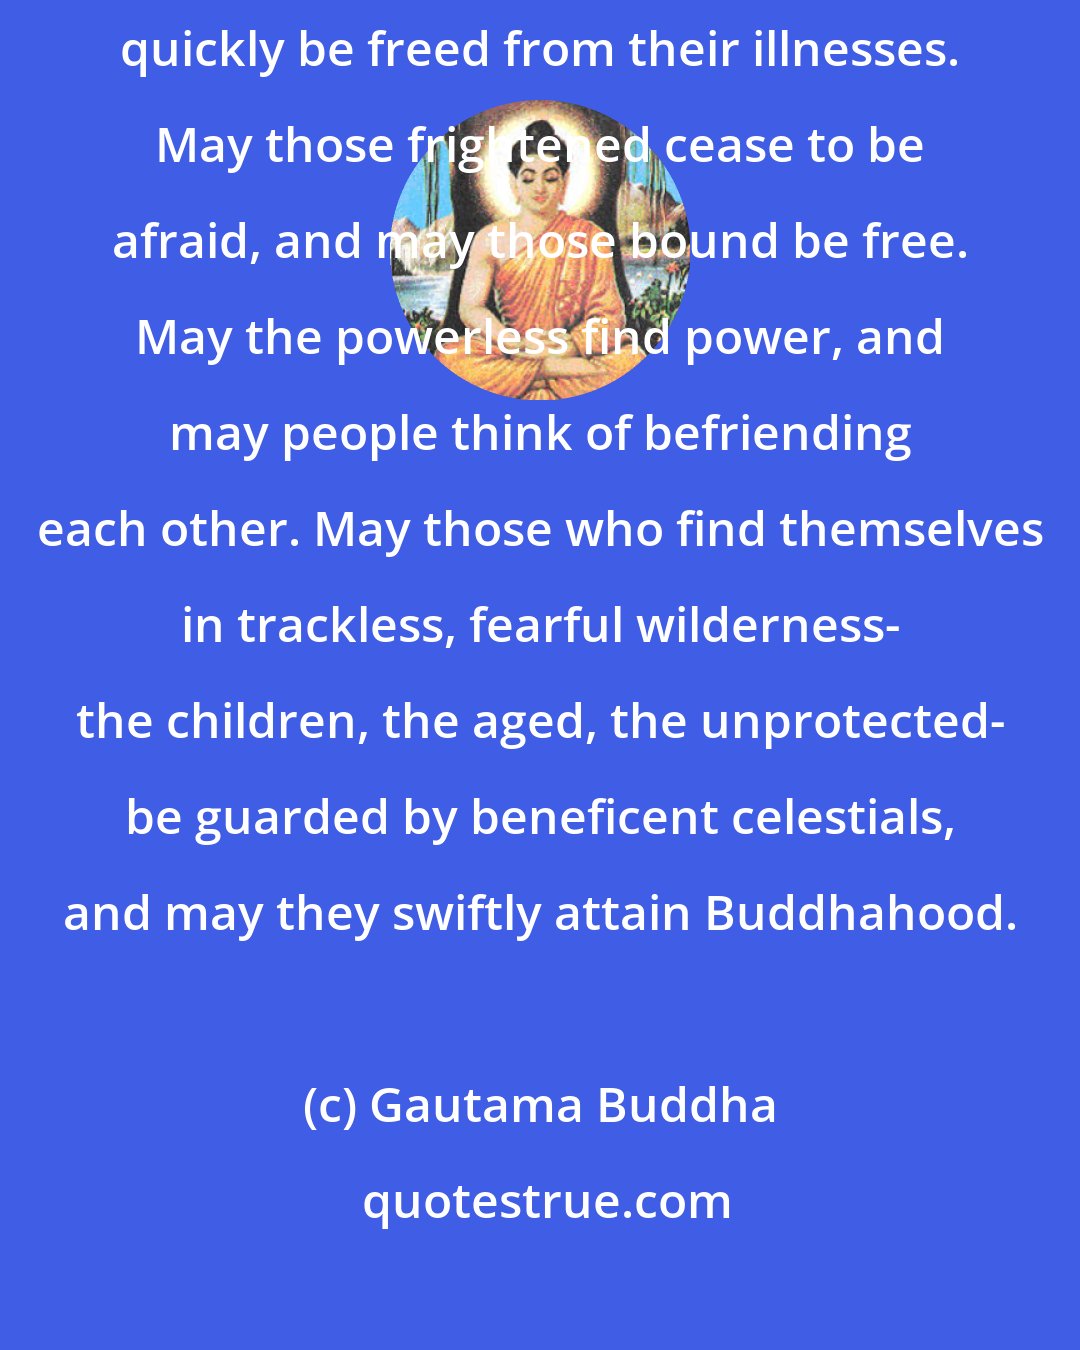 Gautama Buddha: May all beings everywhere plagued with sufferings of body and mind quickly be freed from their illnesses. May those frightened cease to be afraid, and may those bound be free. May the powerless find power, and may people think of befriending each other. May those who find themselves in trackless, fearful wilderness- the children, the aged, the unprotected- be guarded by beneficent celestials, and may they swiftly attain Buddhahood.